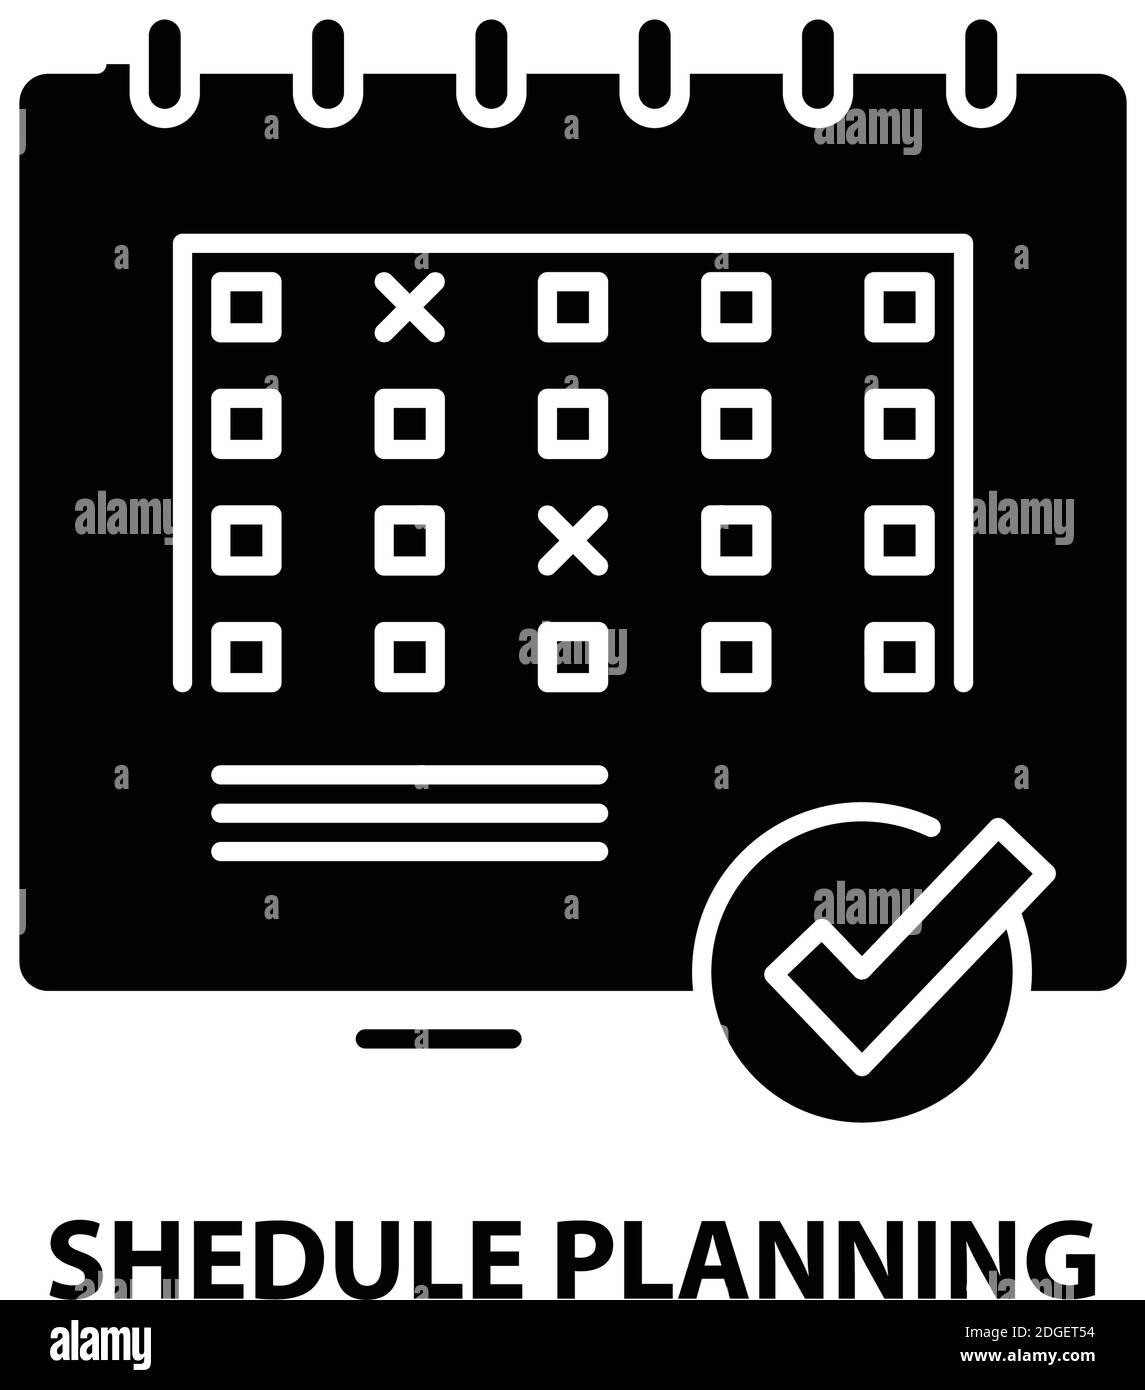 shedule planning icon, black vector sign with editable strokes, concept illustration Stock Vector